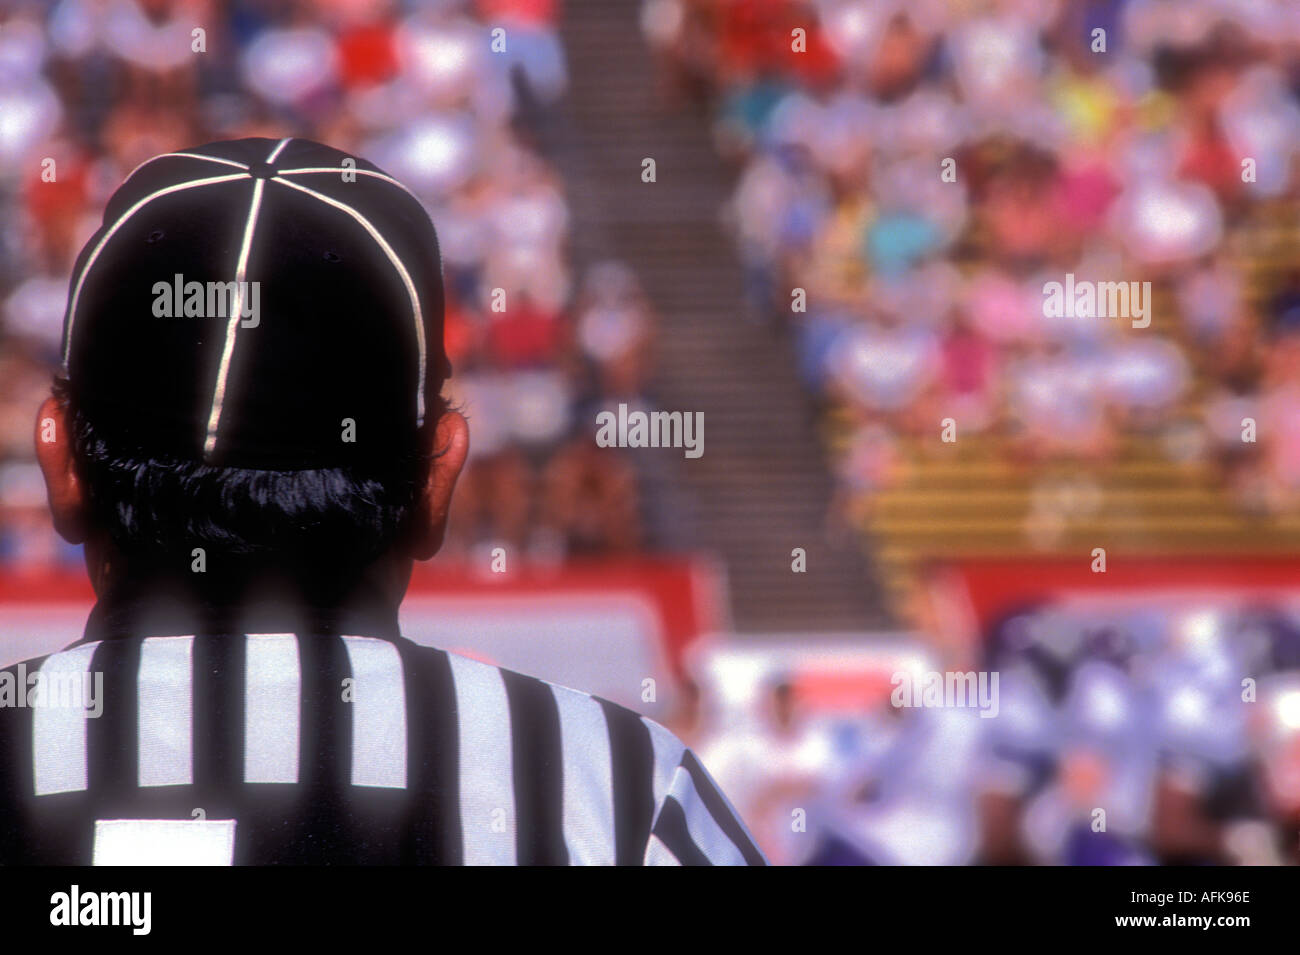 Rear view of umpires head at football game Stock Photo